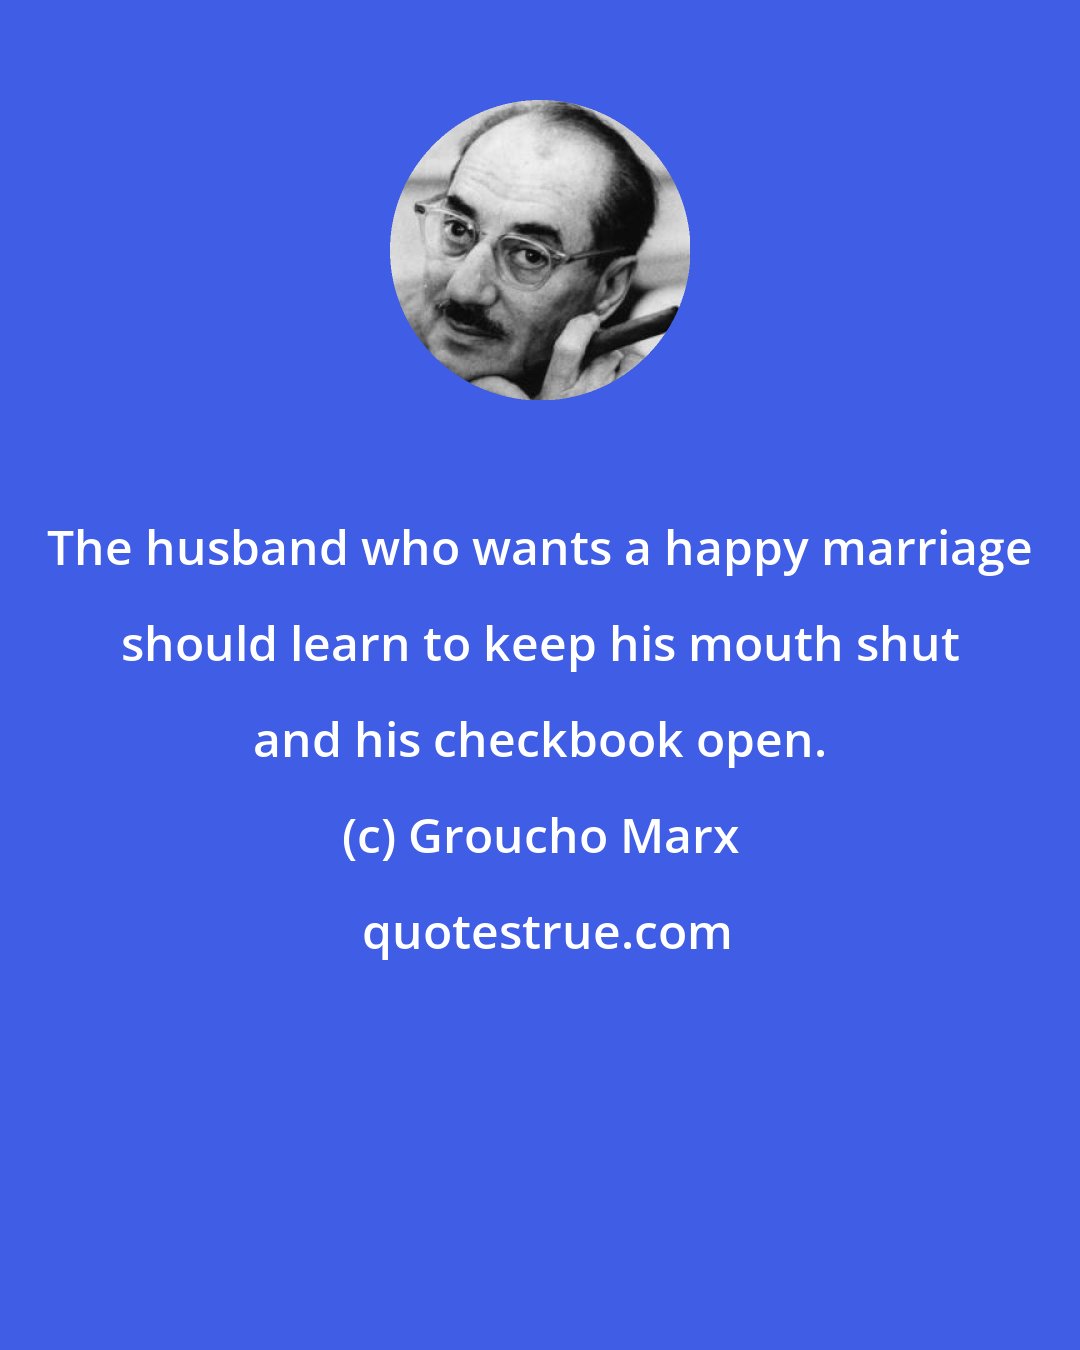 Groucho Marx: The husband who wants a happy marriage should learn to keep his mouth shut and his checkbook open.